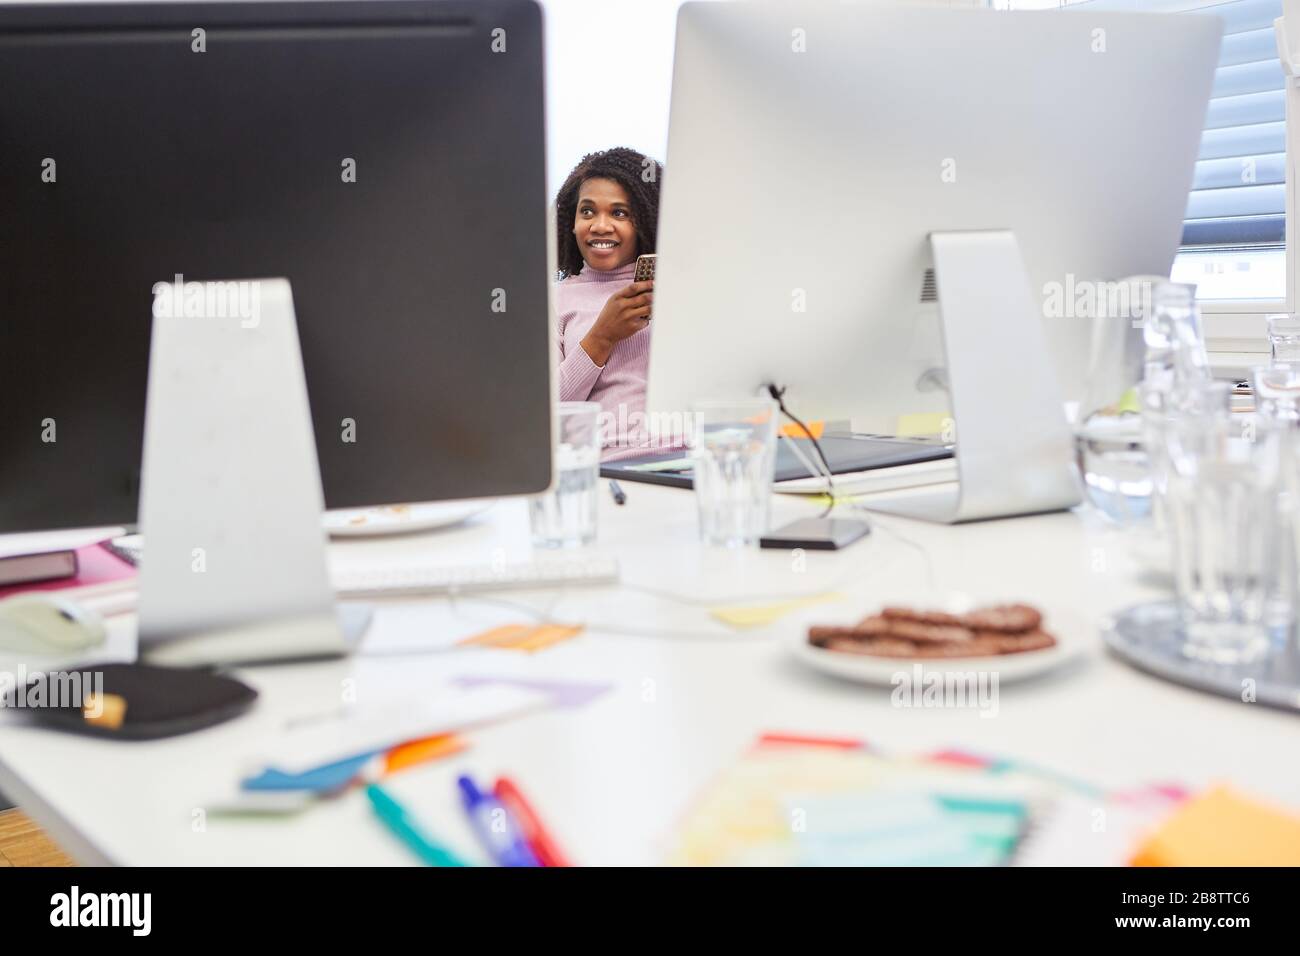 African business woman in internet agency office with computers on table Stock Photo